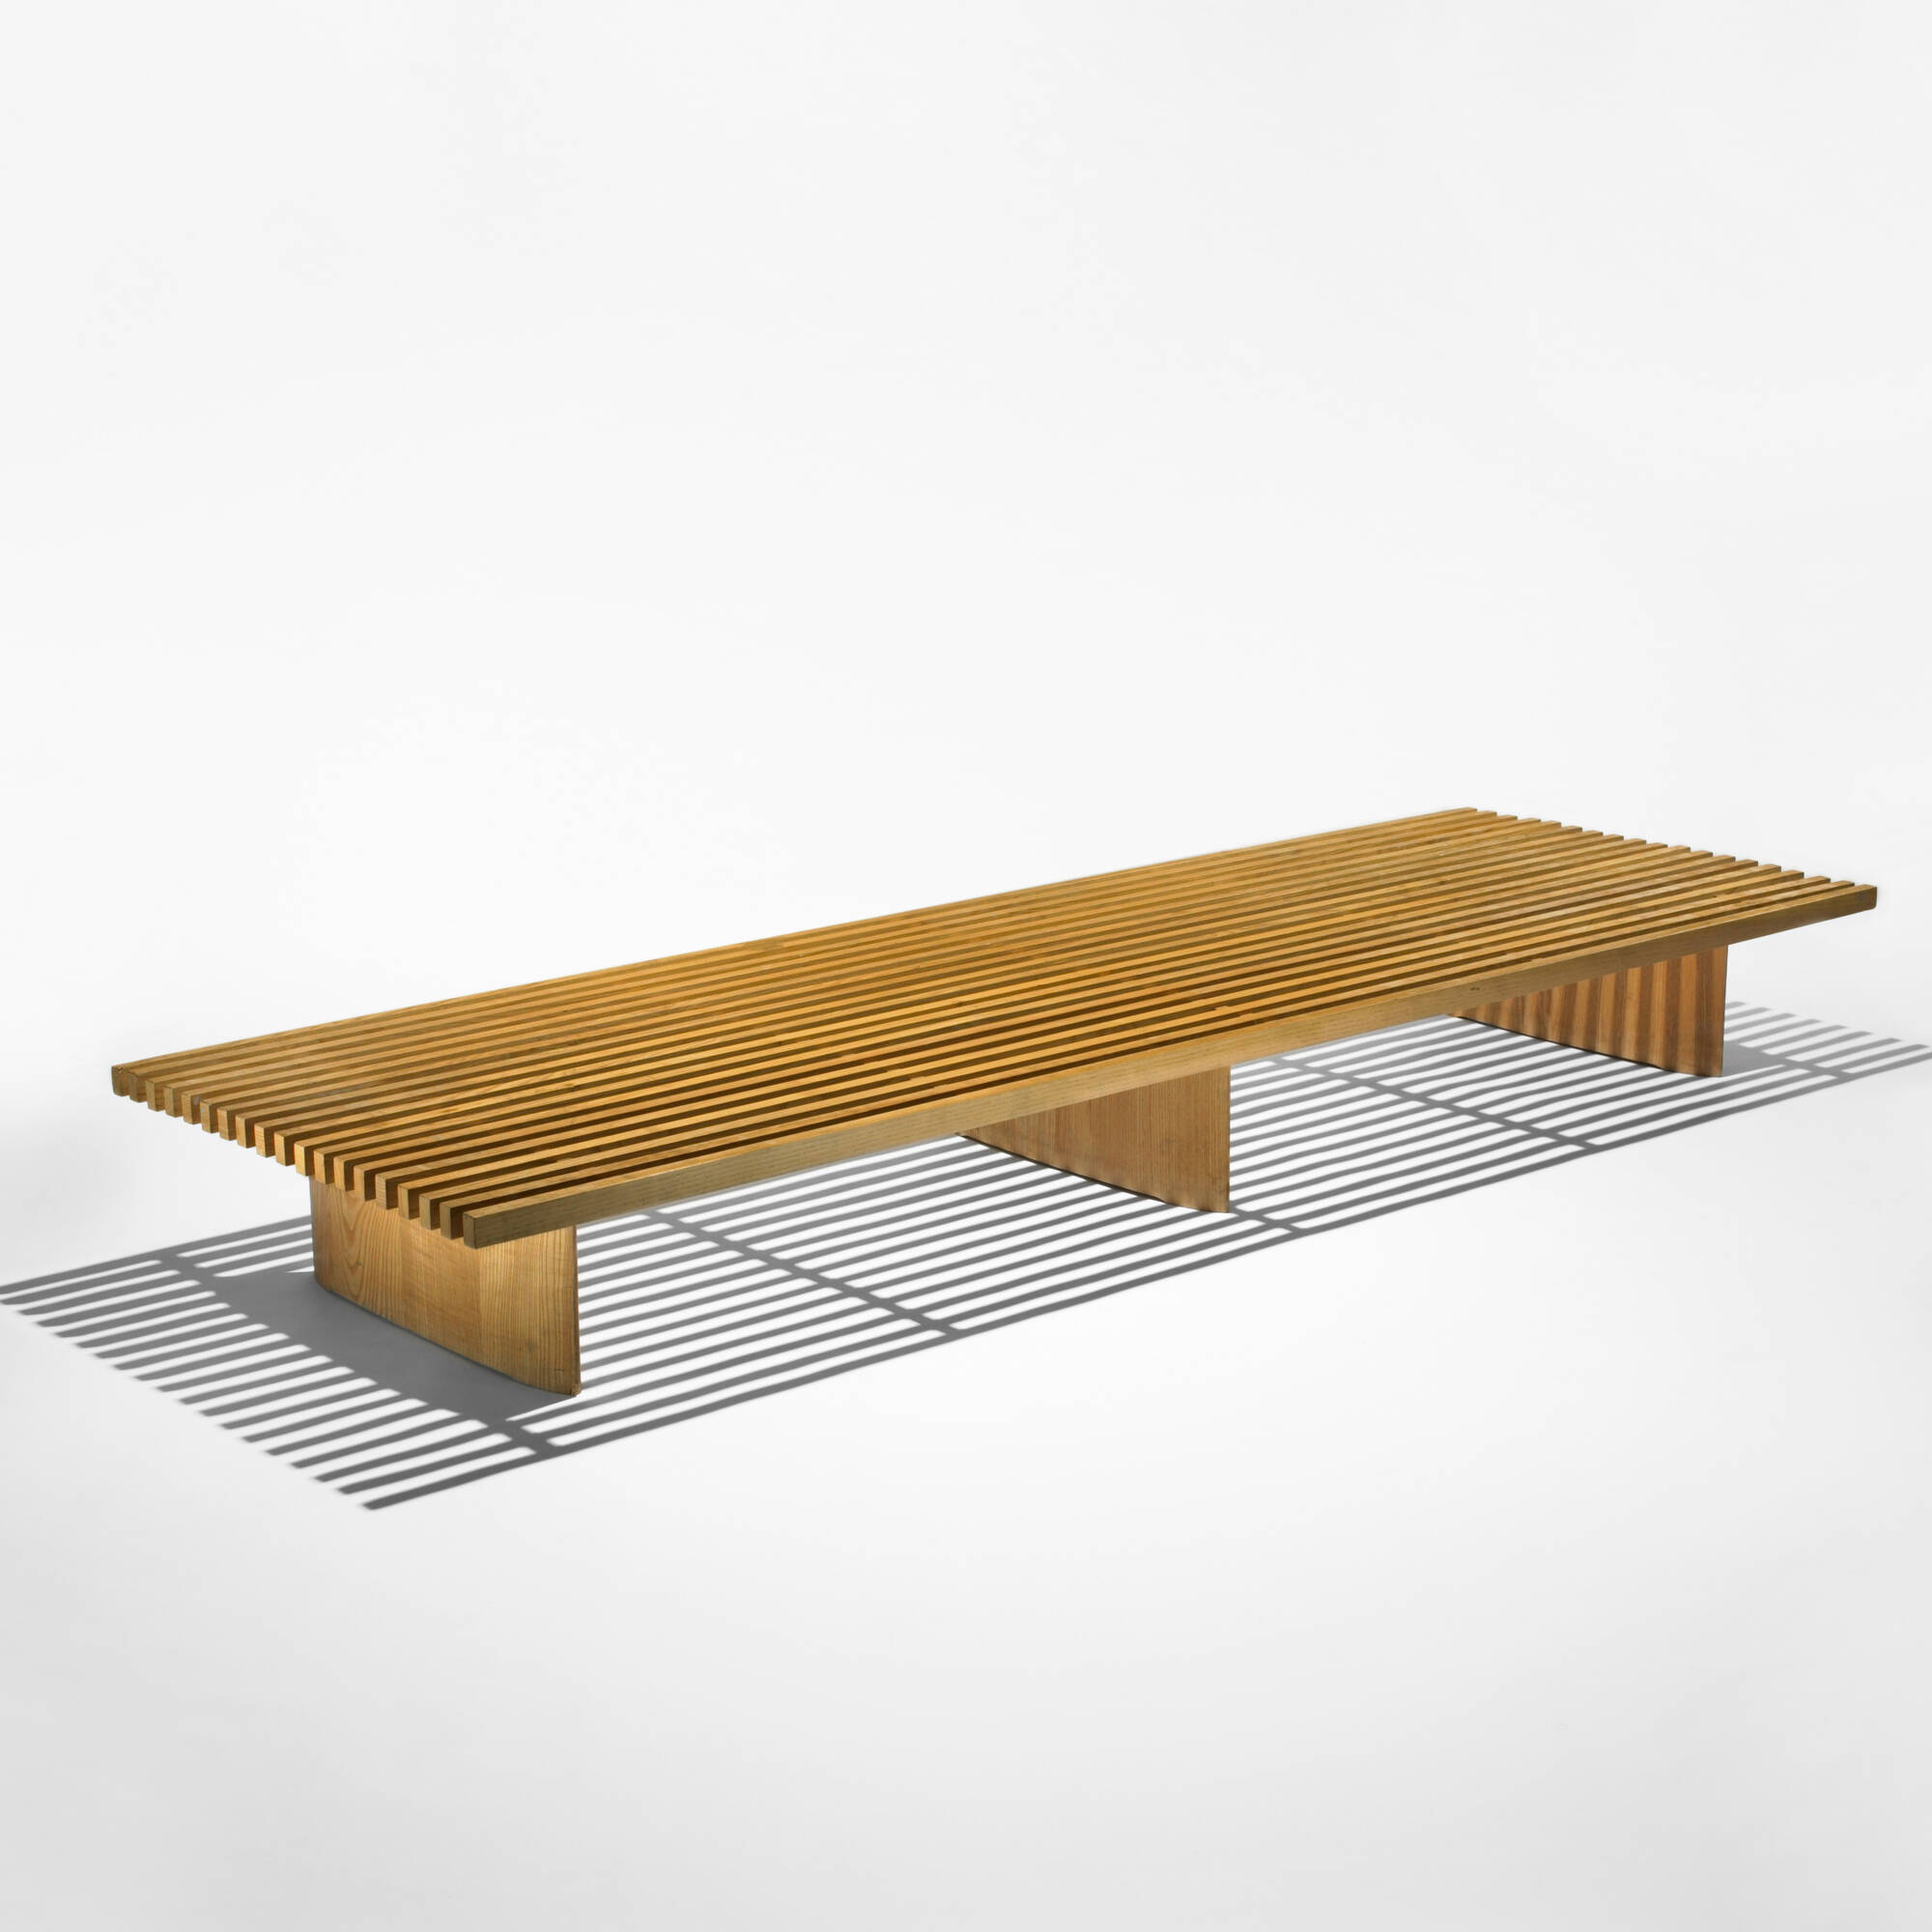 141: CHARLOTTE PERRIAND, Tokyo bench < Important Design (Day 1), 9